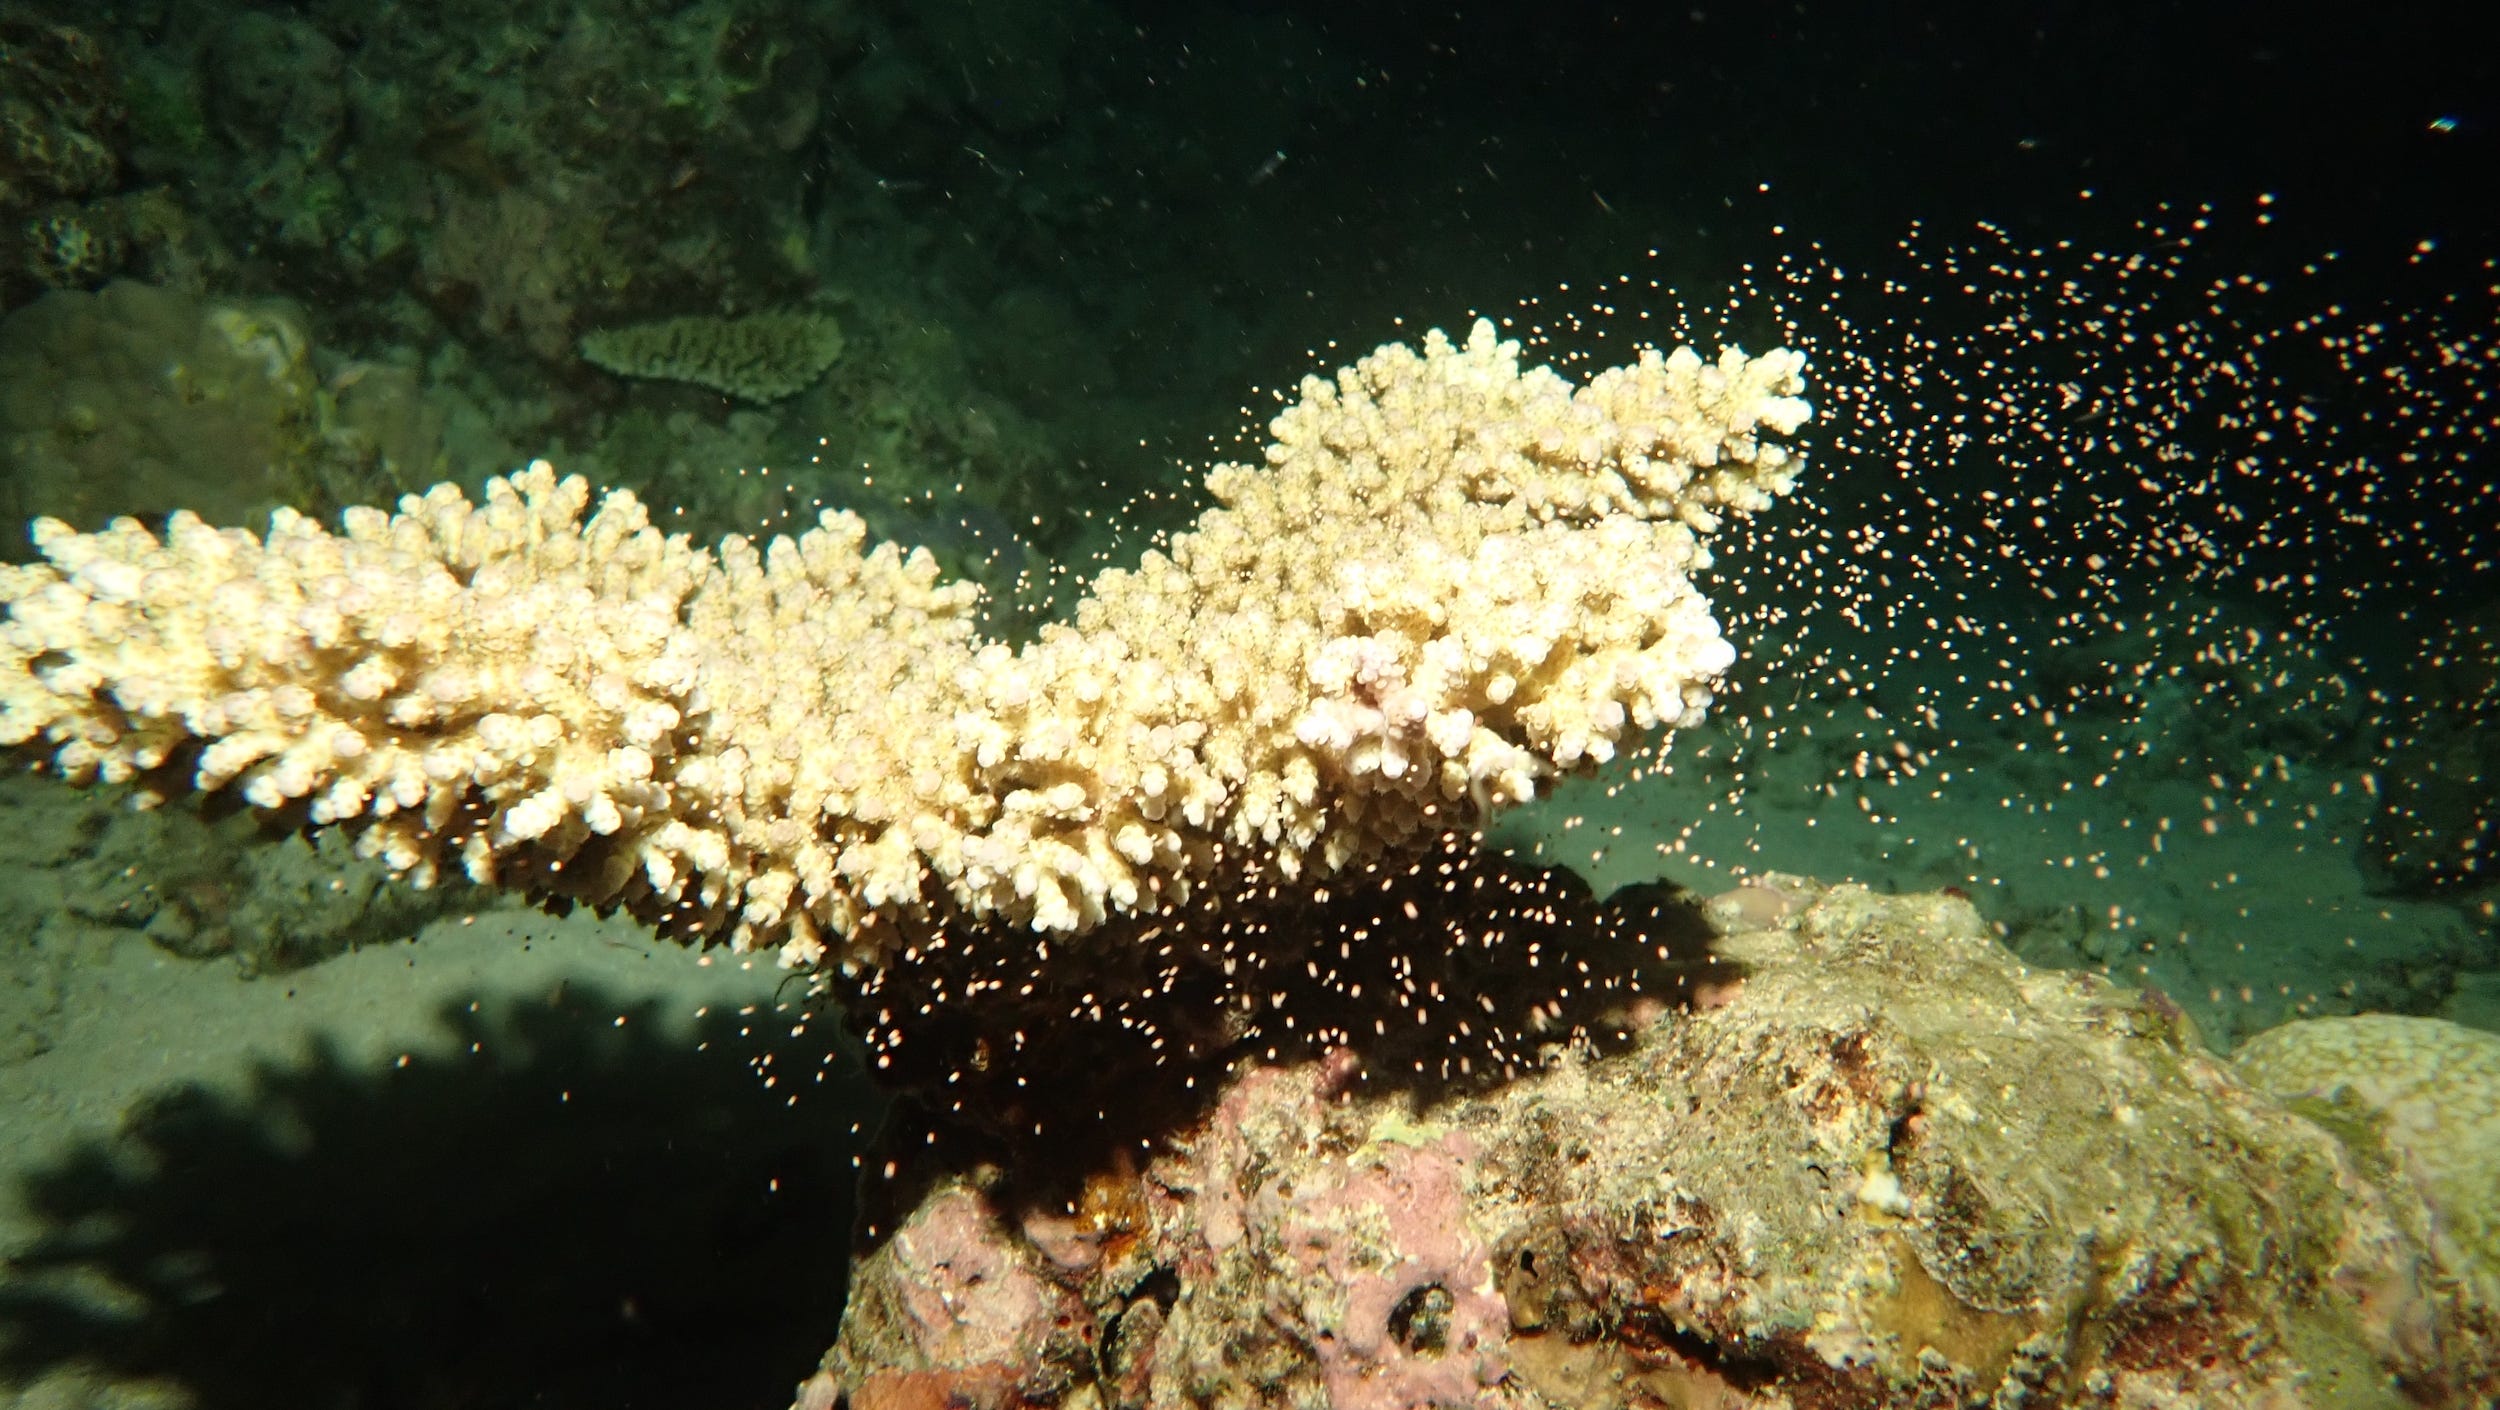 wide flat yellow coral releasing pollen-like bundles of sperm and eggs into water